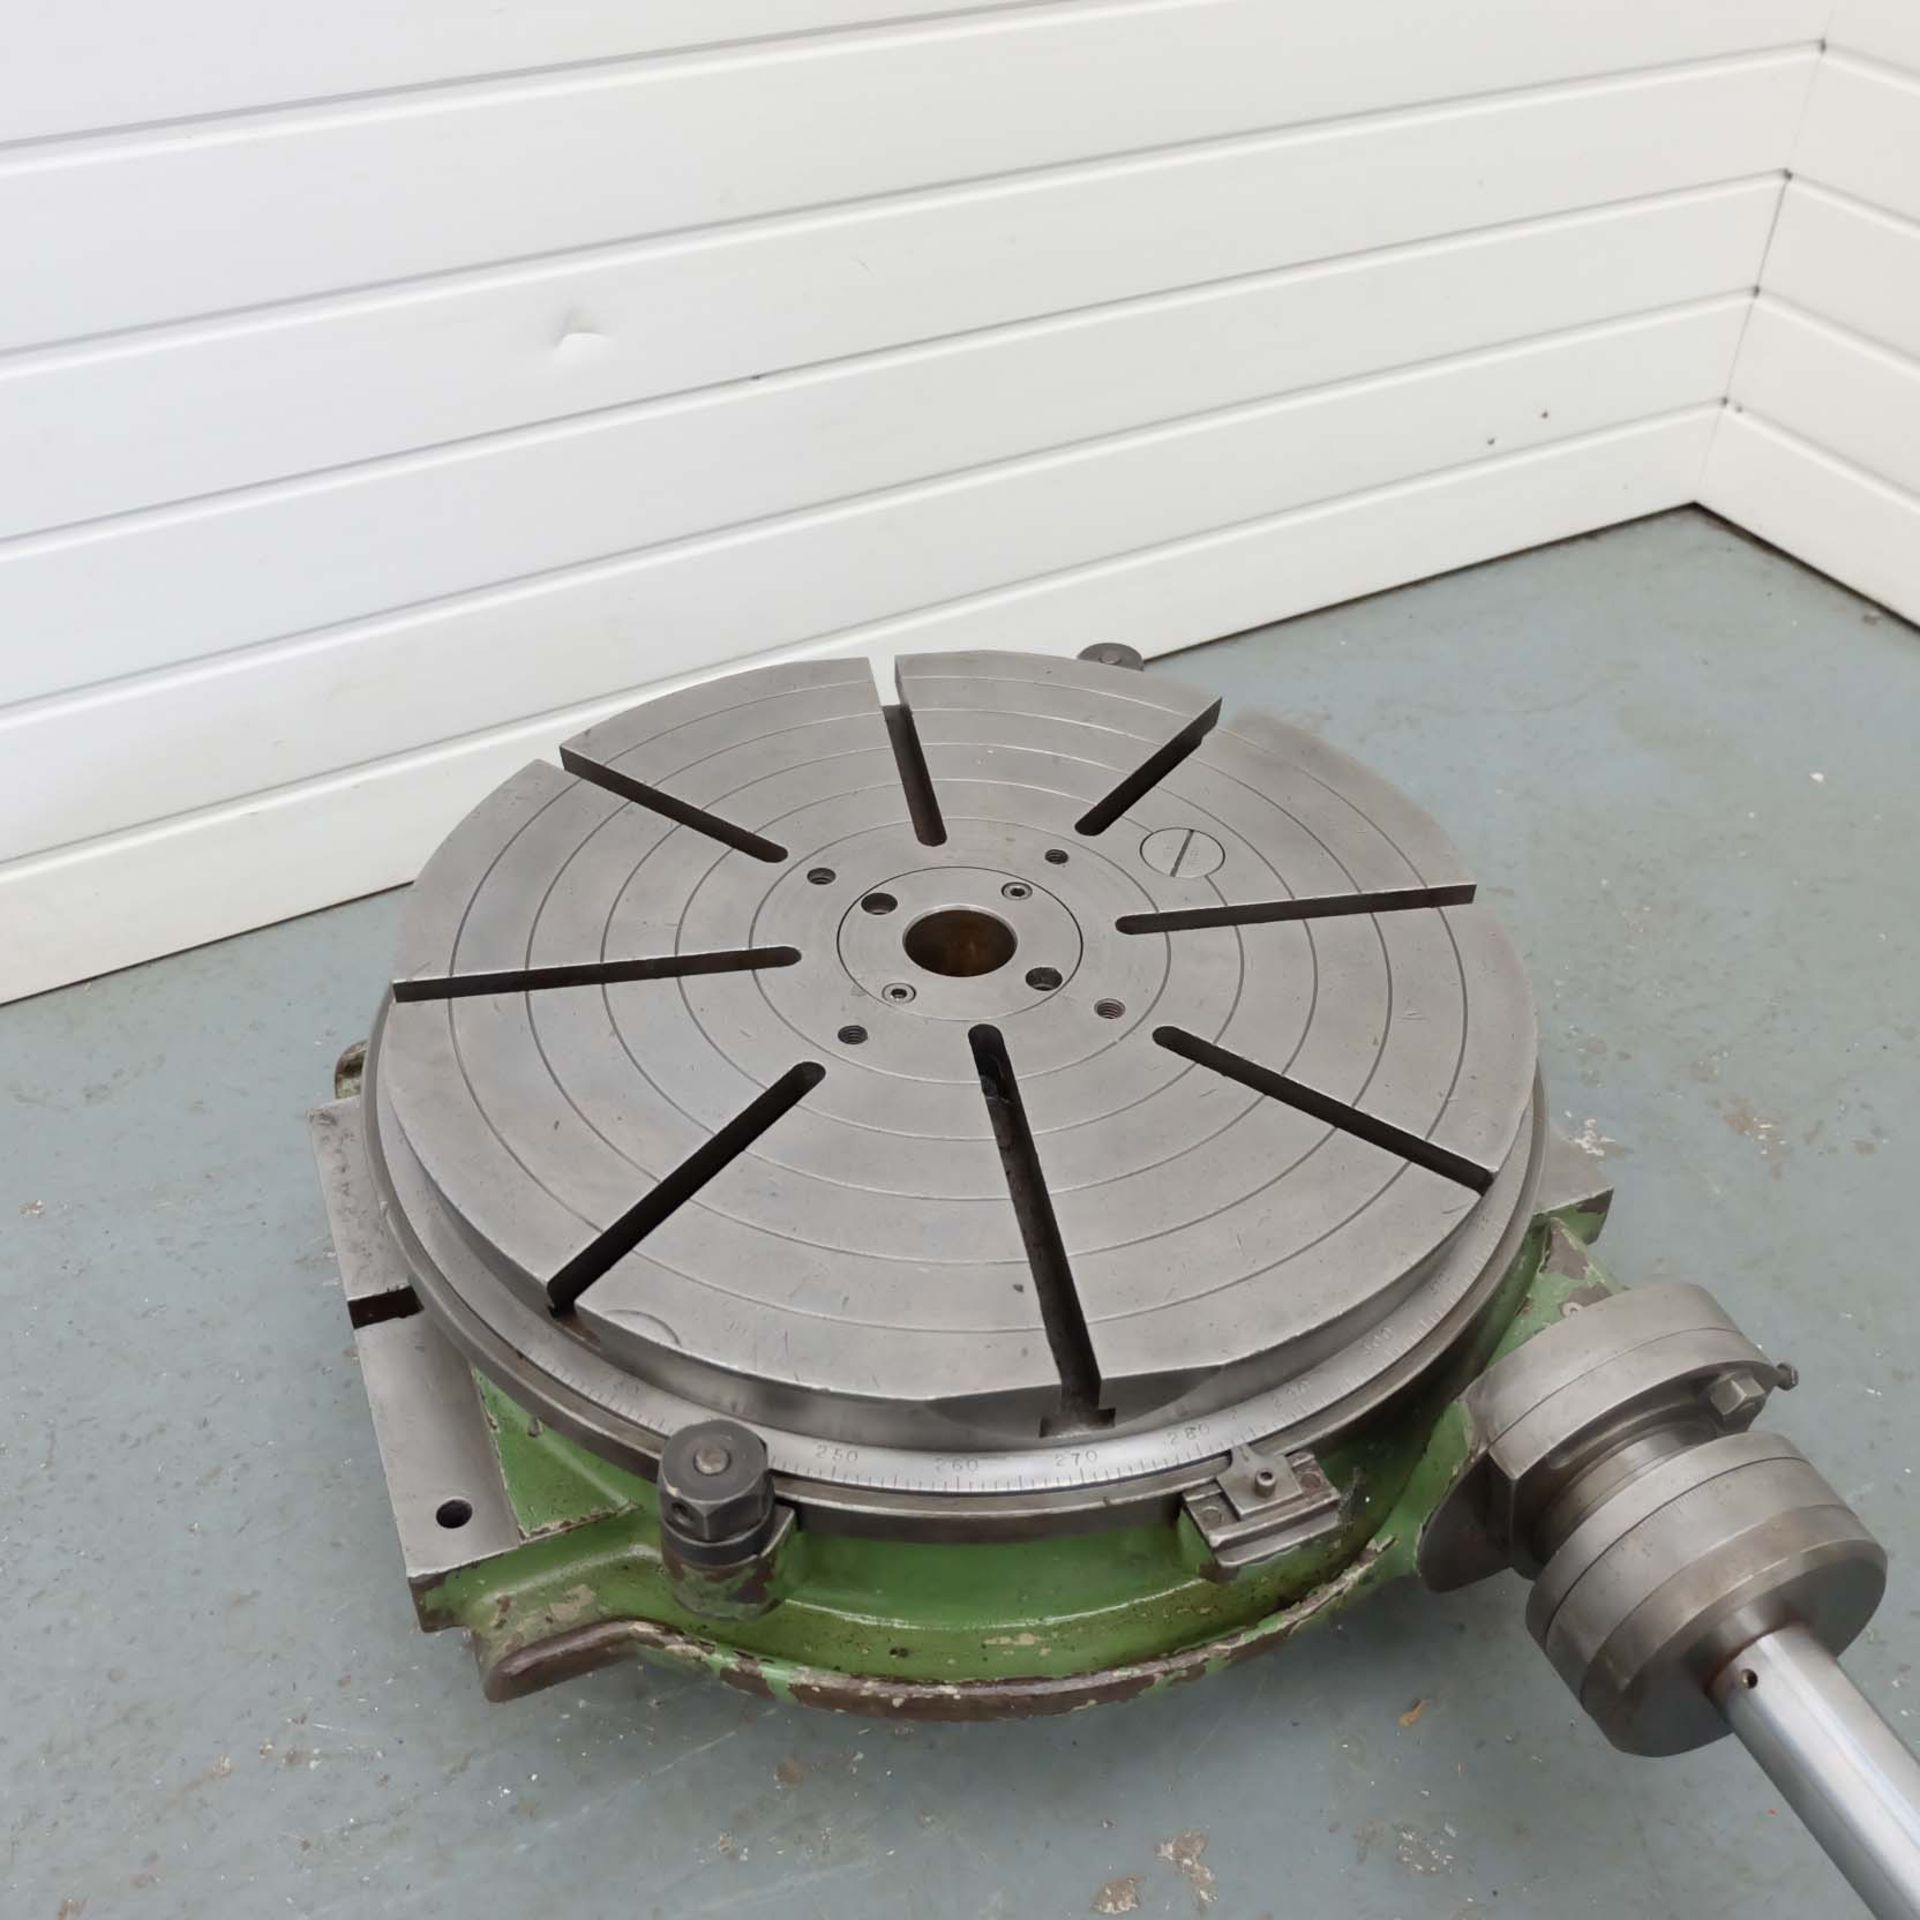 MECA 19 1/2" Rotary Table. With Extended Handwheel 14". Tee Slotted. - Image 3 of 7